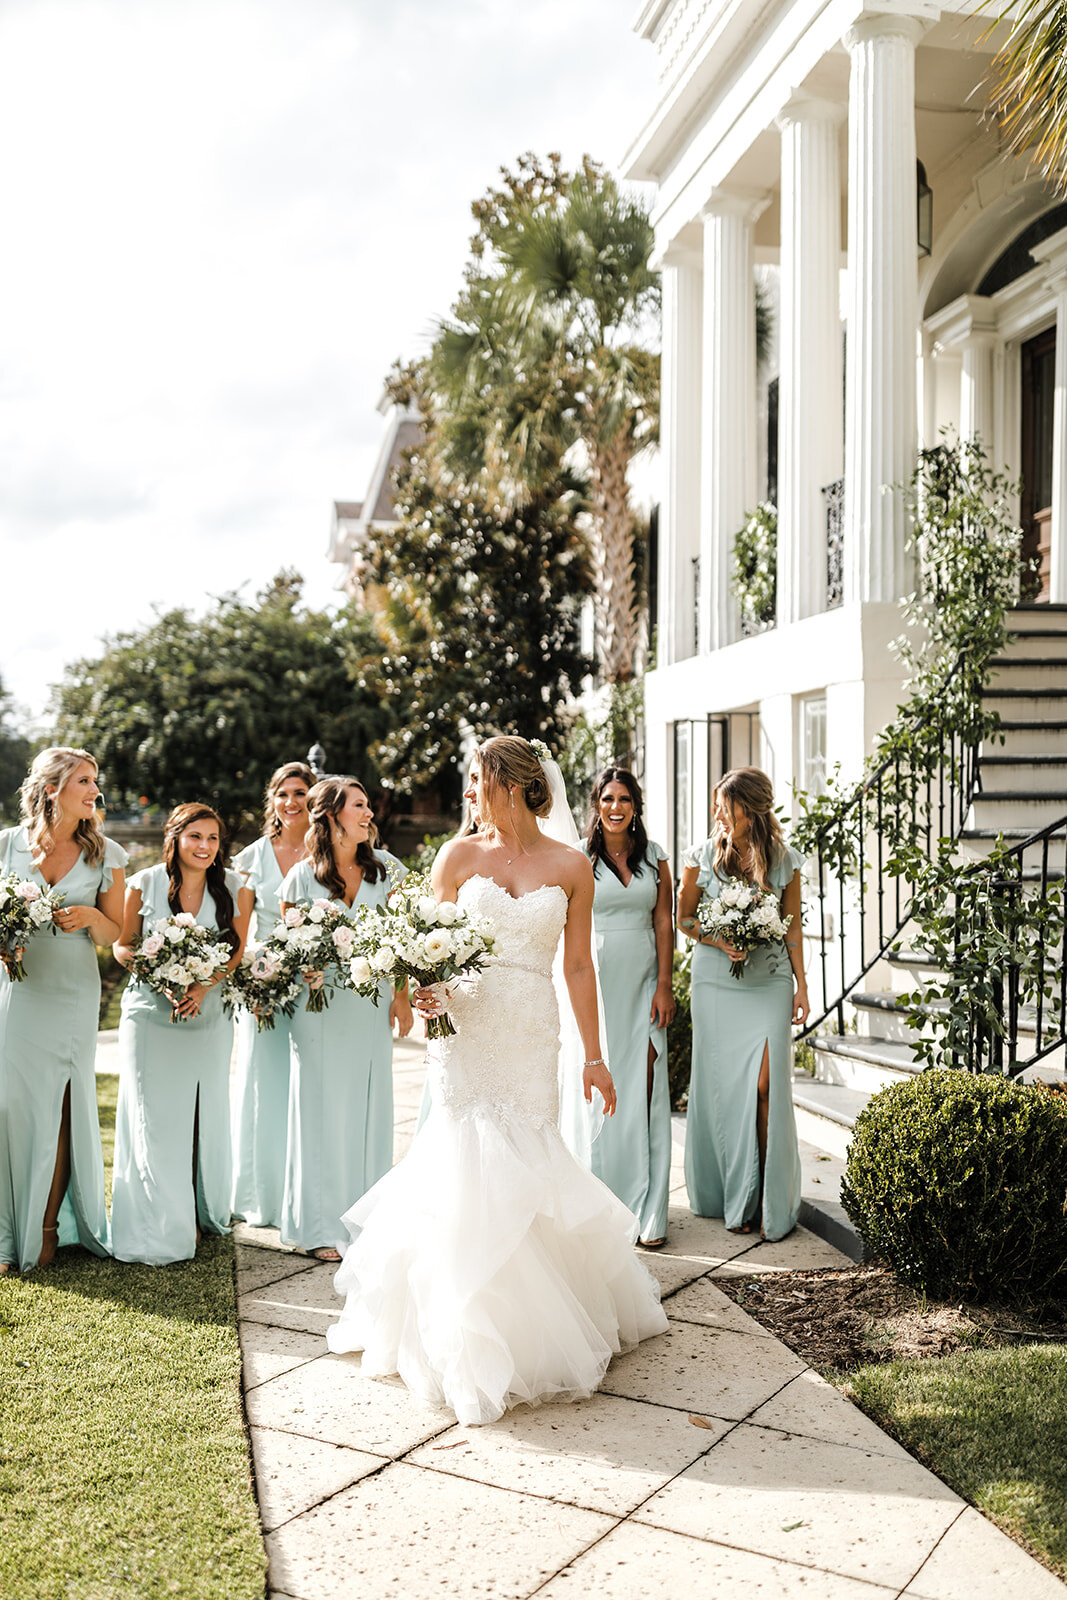 ivory-and-bride-down-for-the-gown-cassie-real-bride-wedding-dress-maggie-sottero-blog-bridal-blog-wedding-dress-mermaid-bridal-gown-wedding-gown-bridal-shop-bridal-boutique-bridal-shopping-bridal-style-savannah-georgia-GMP504-126-2.jpg